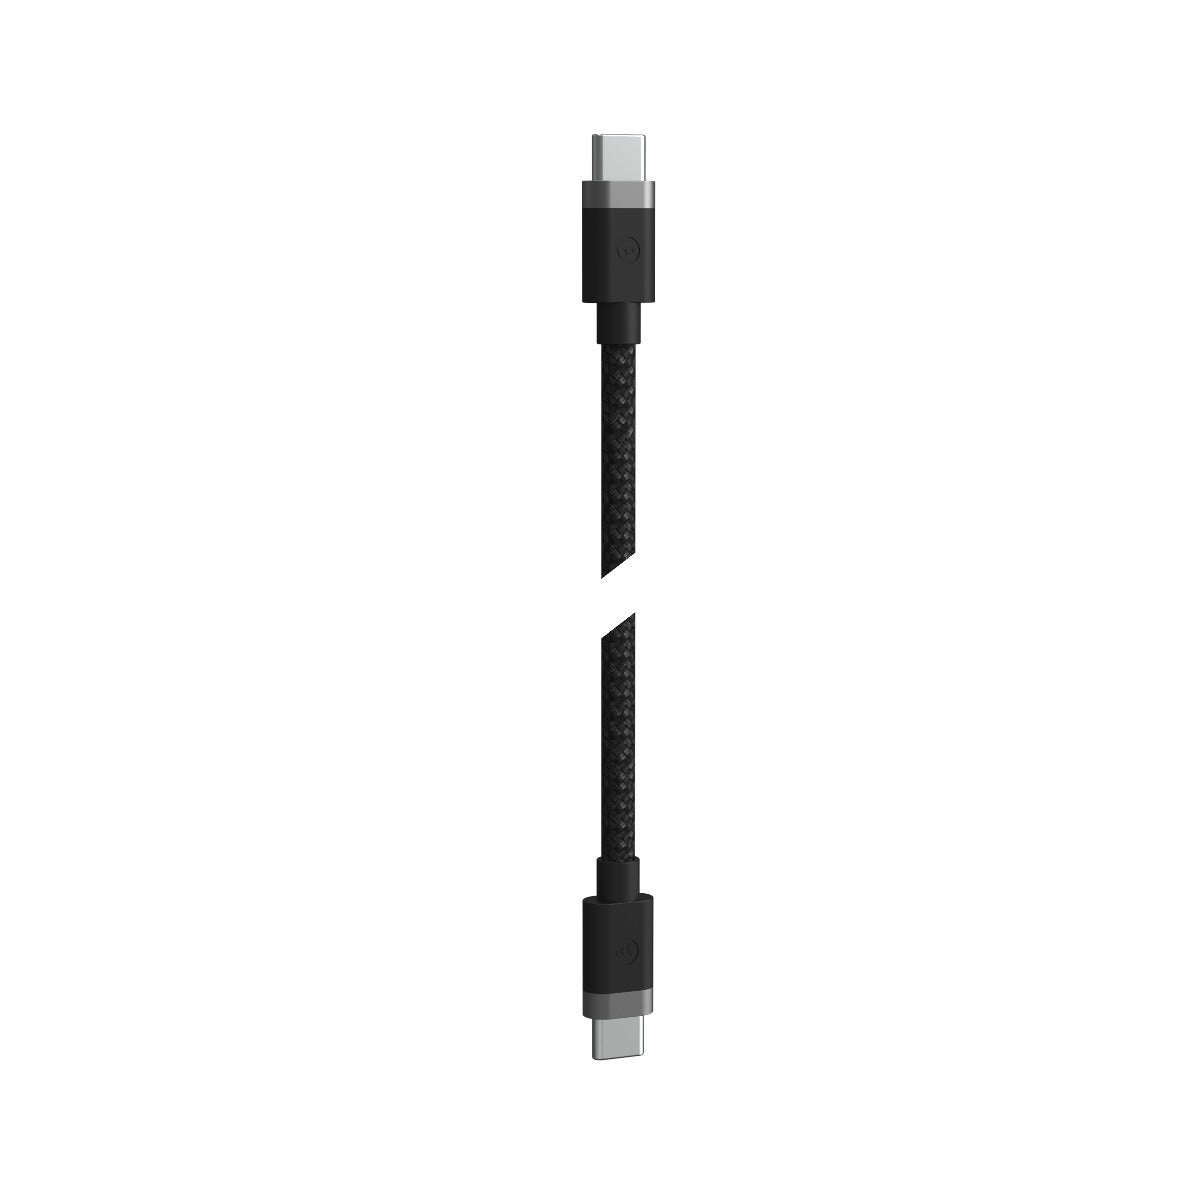 USB-C Cable with USB-C Connector (Apple Exclusive 2021)